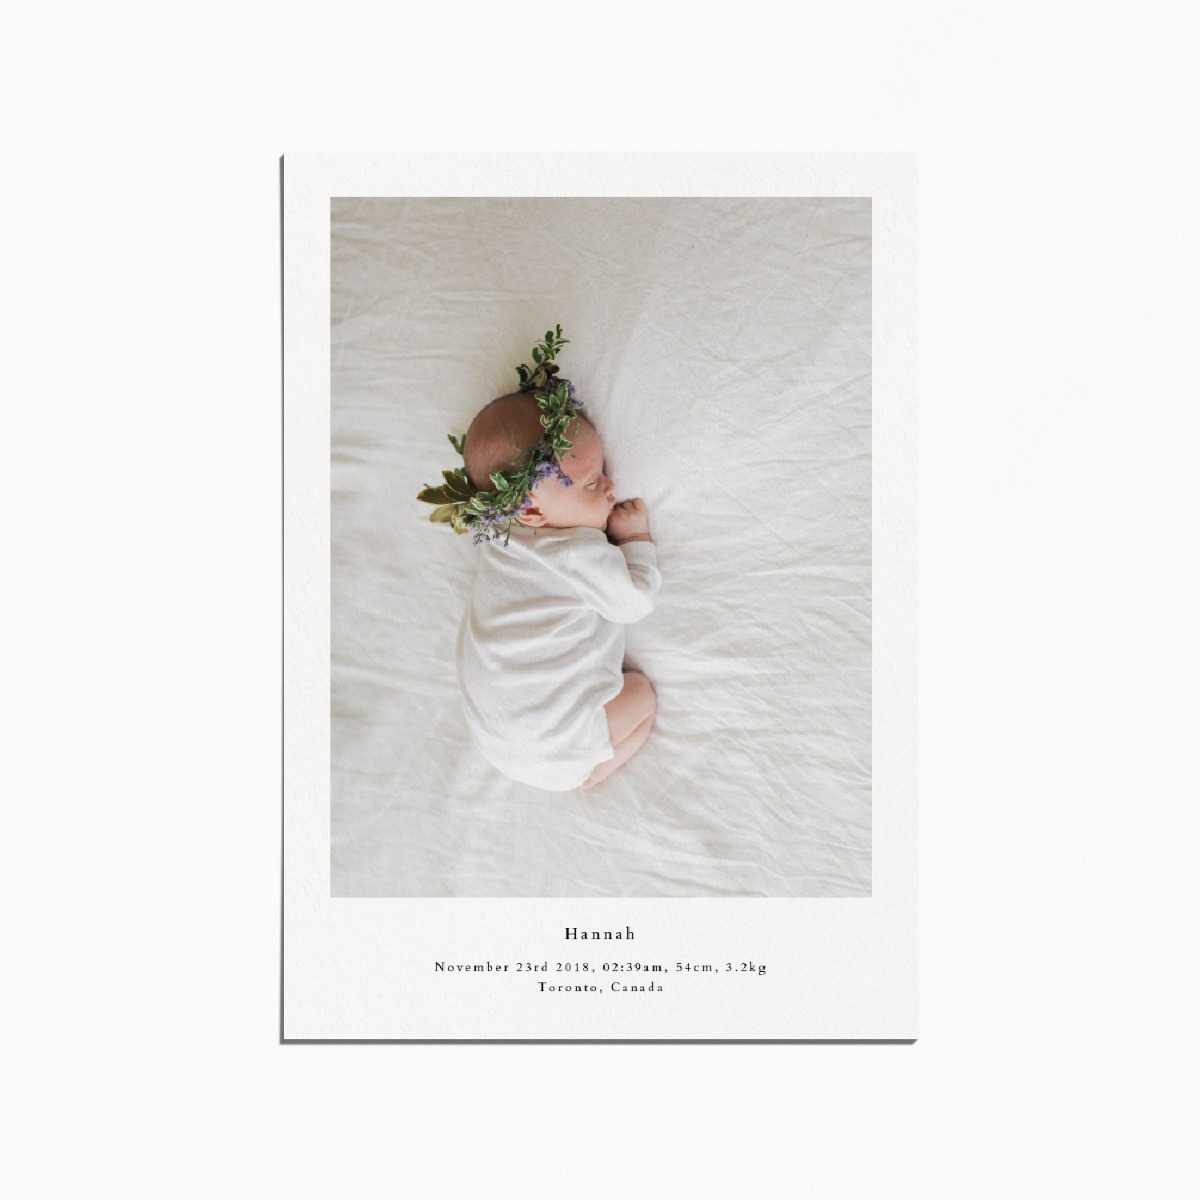 birth announcement card with an image of a baby sleeping and wearing a flower crown